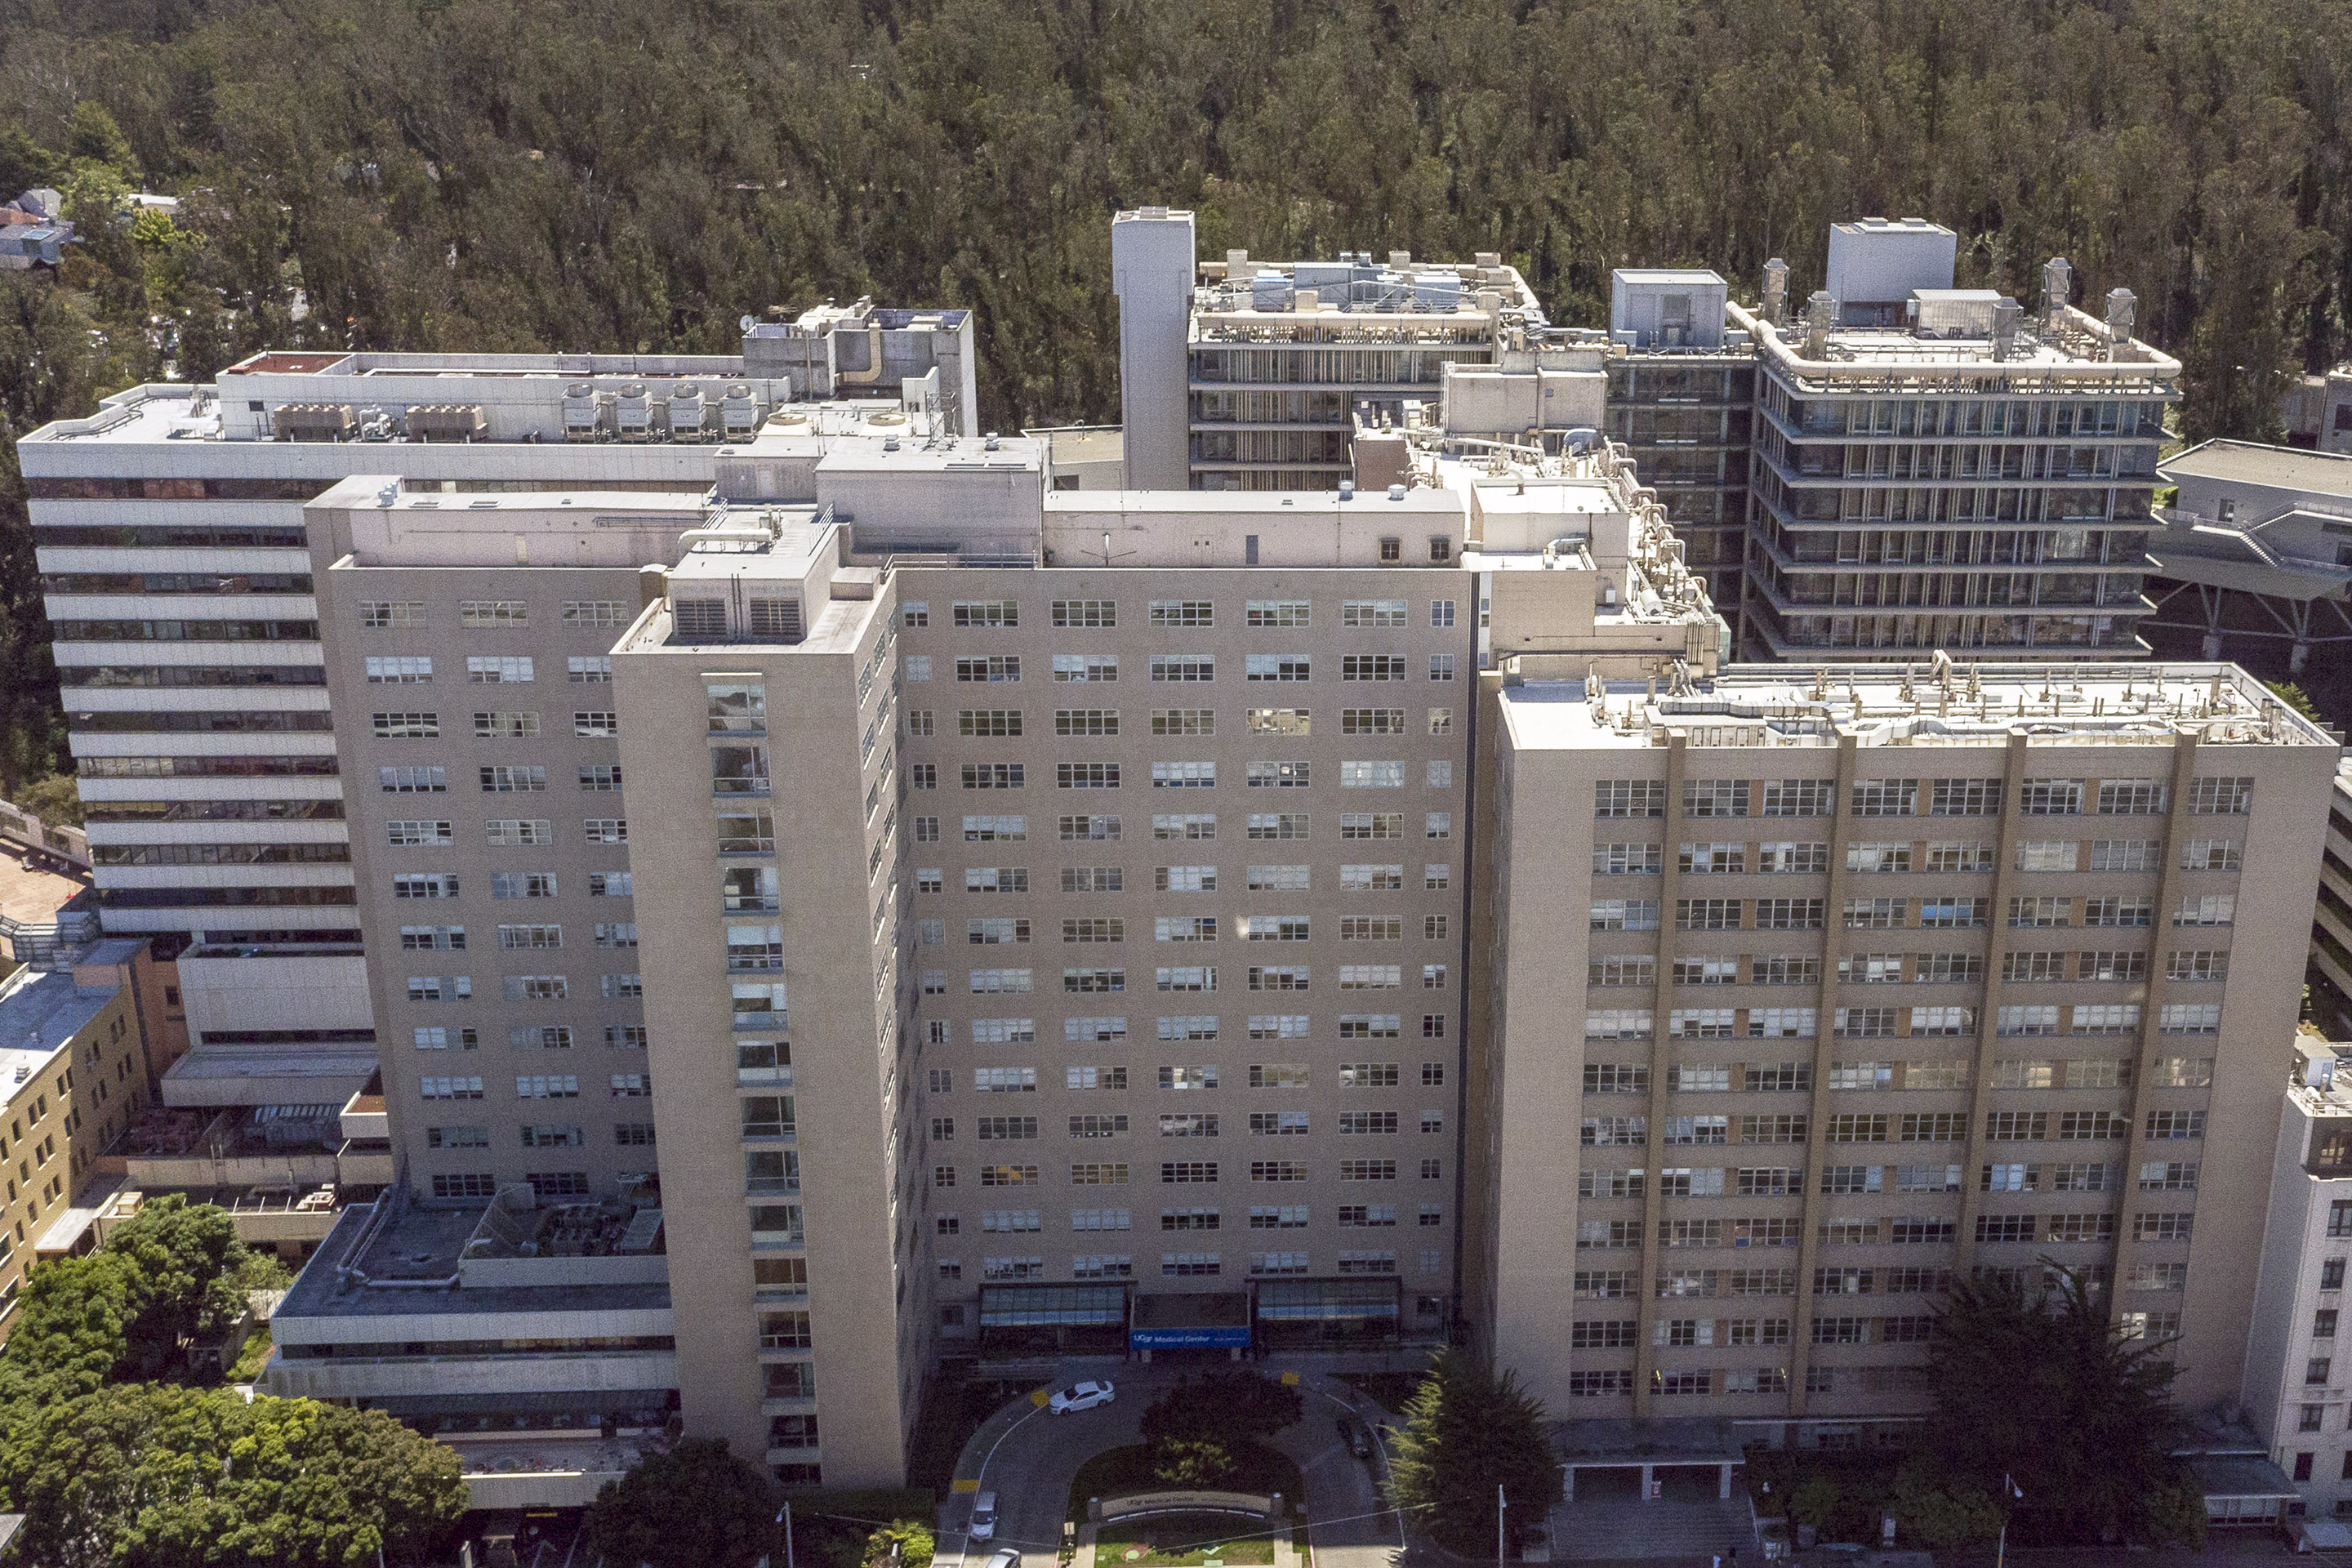 aerial view of the UCSF Medical Center at Parnassus Heights